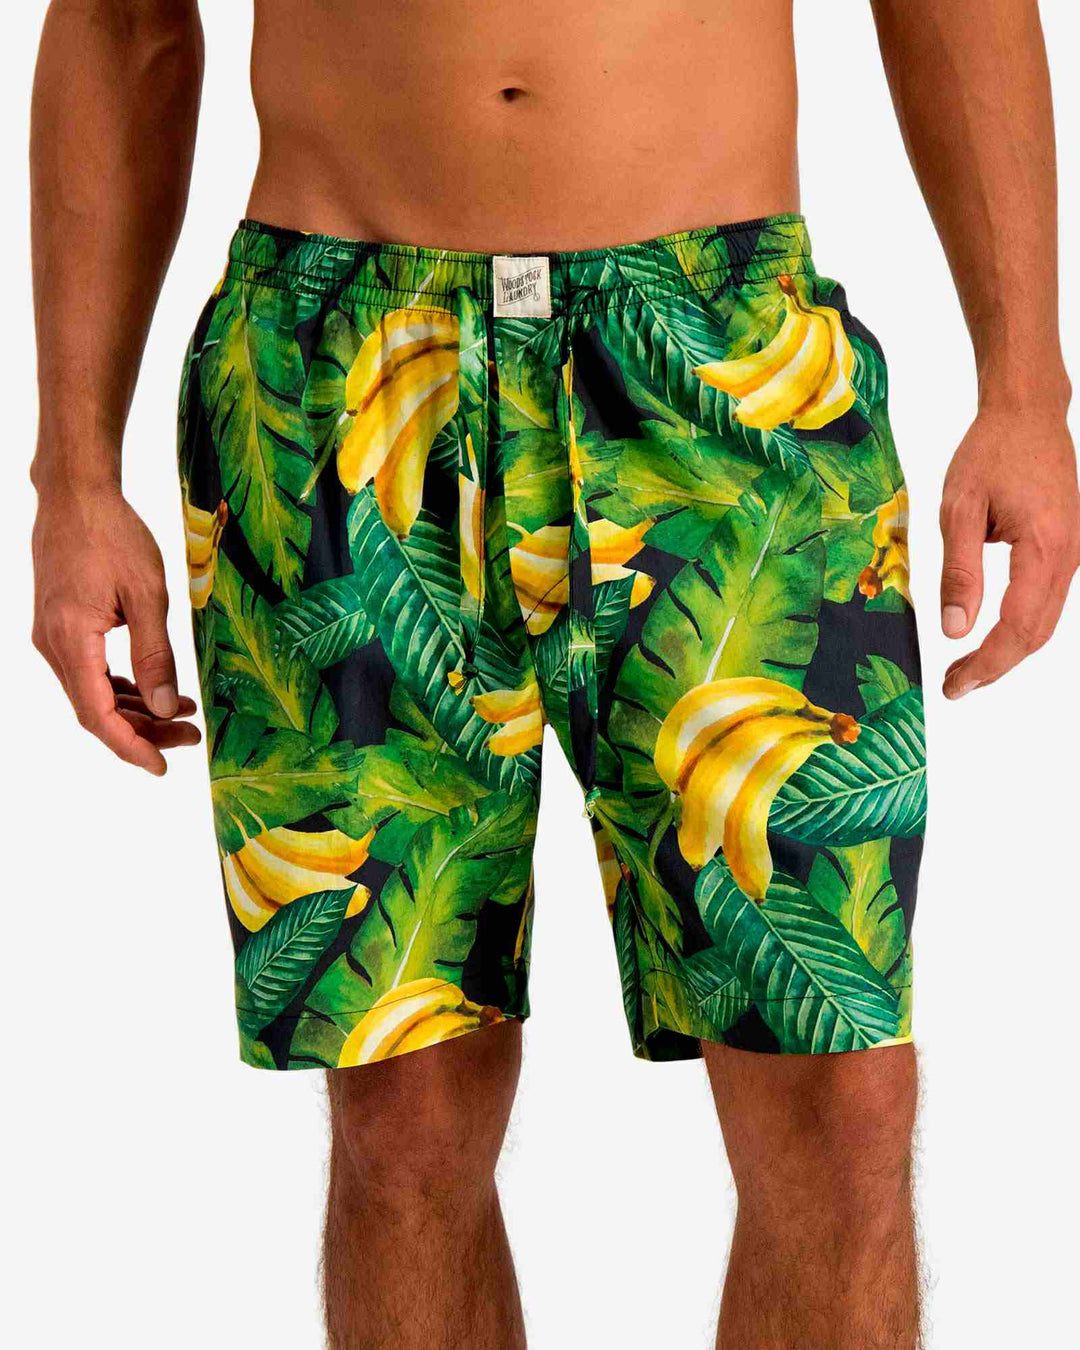 Mens lounge shorts with a bananas on leaves pattern